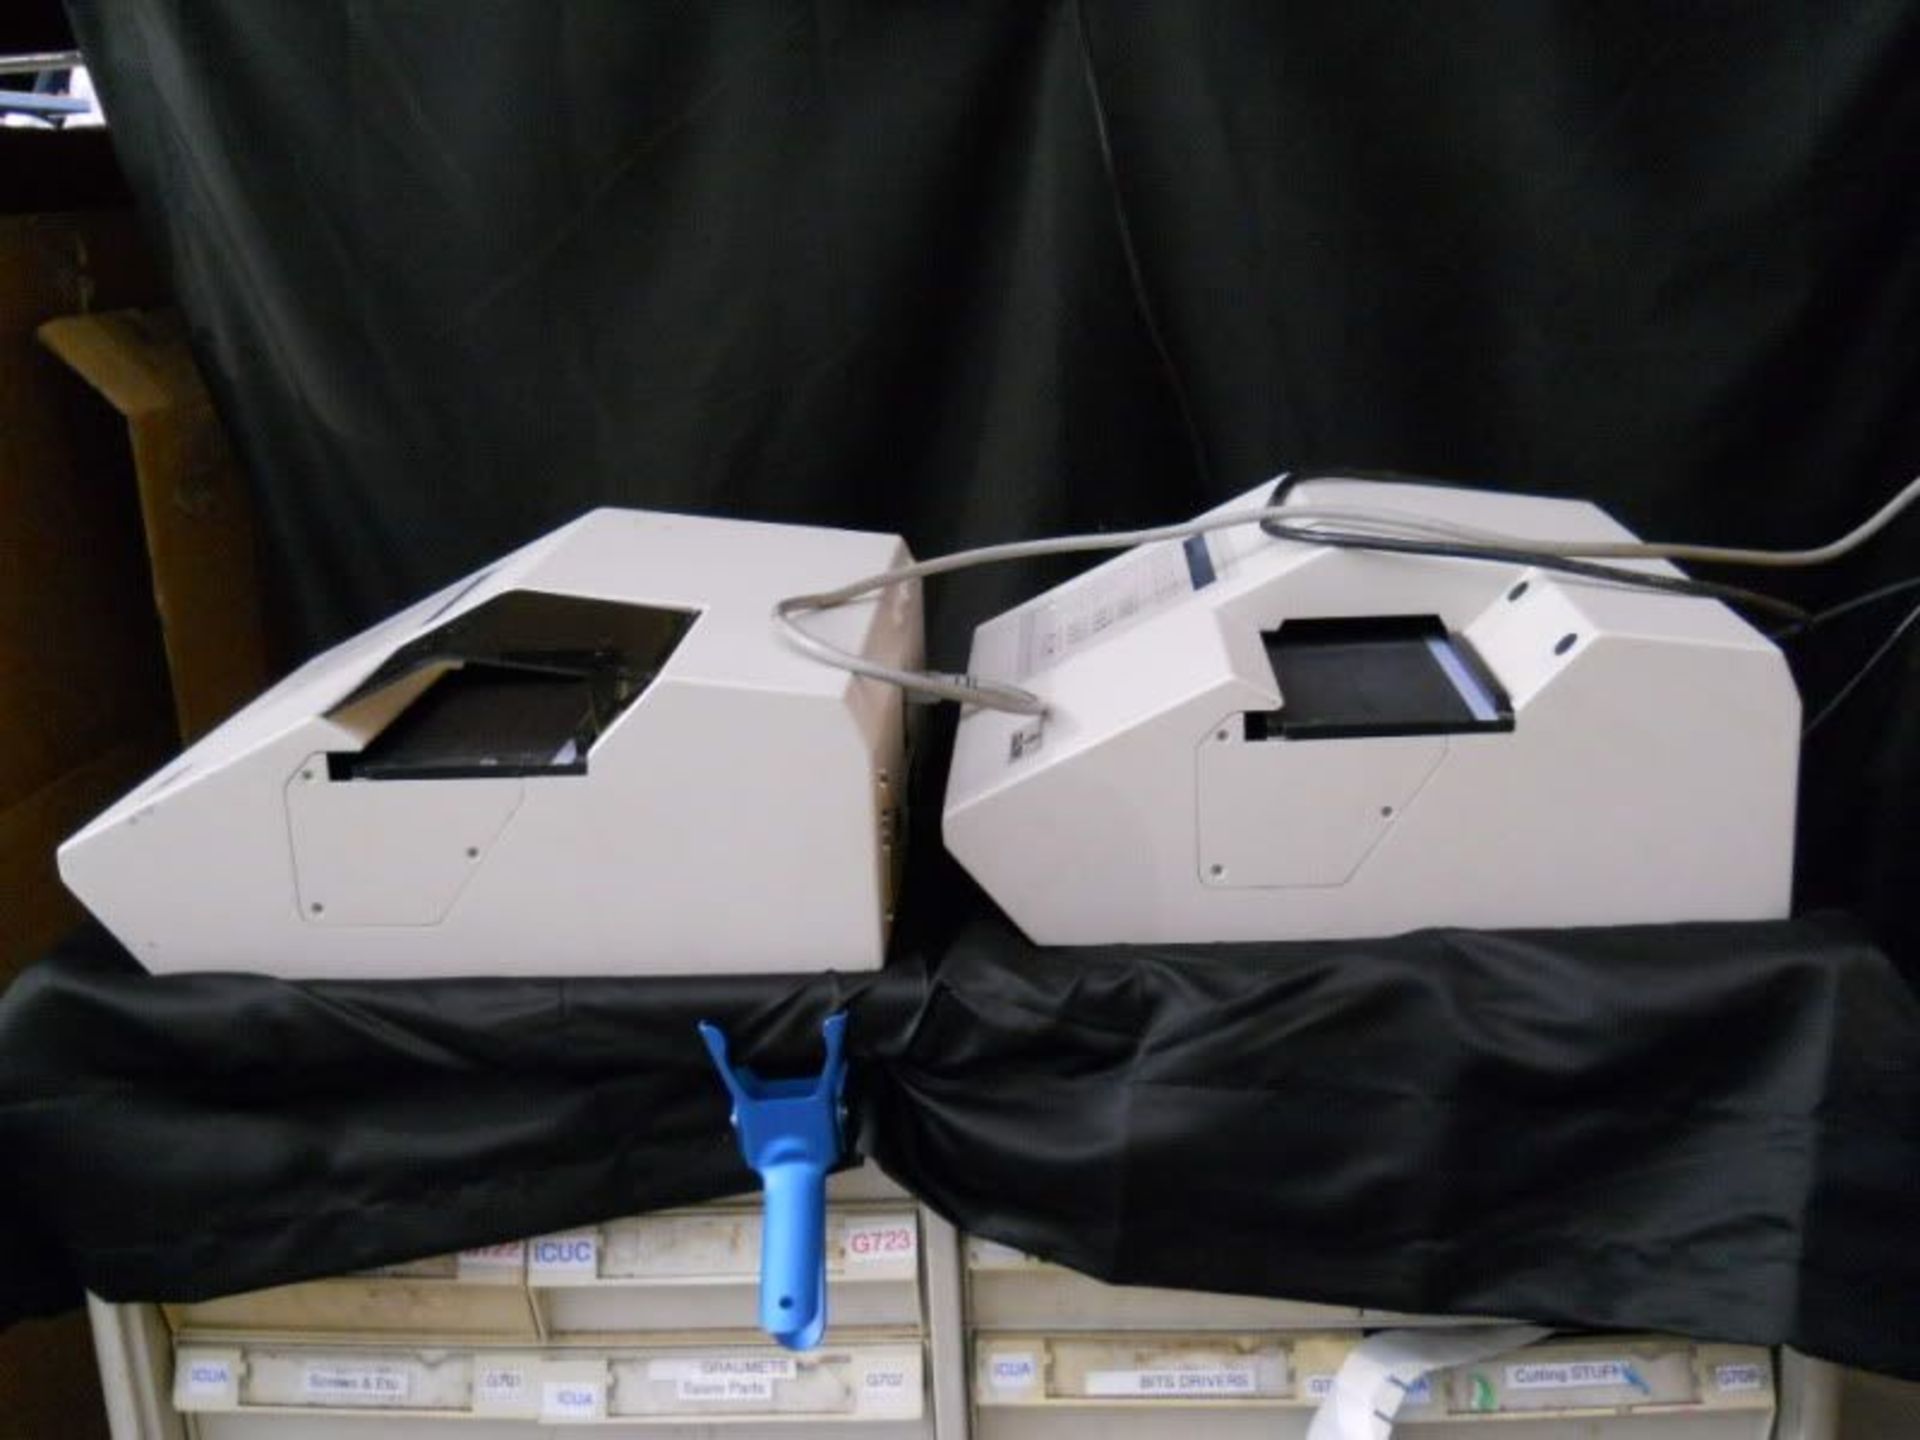 Lot of 2 Dynatech MR5000 Microplate Readers (Parts Not Working), Qty 1, 221094217837 - Image 12 of 12